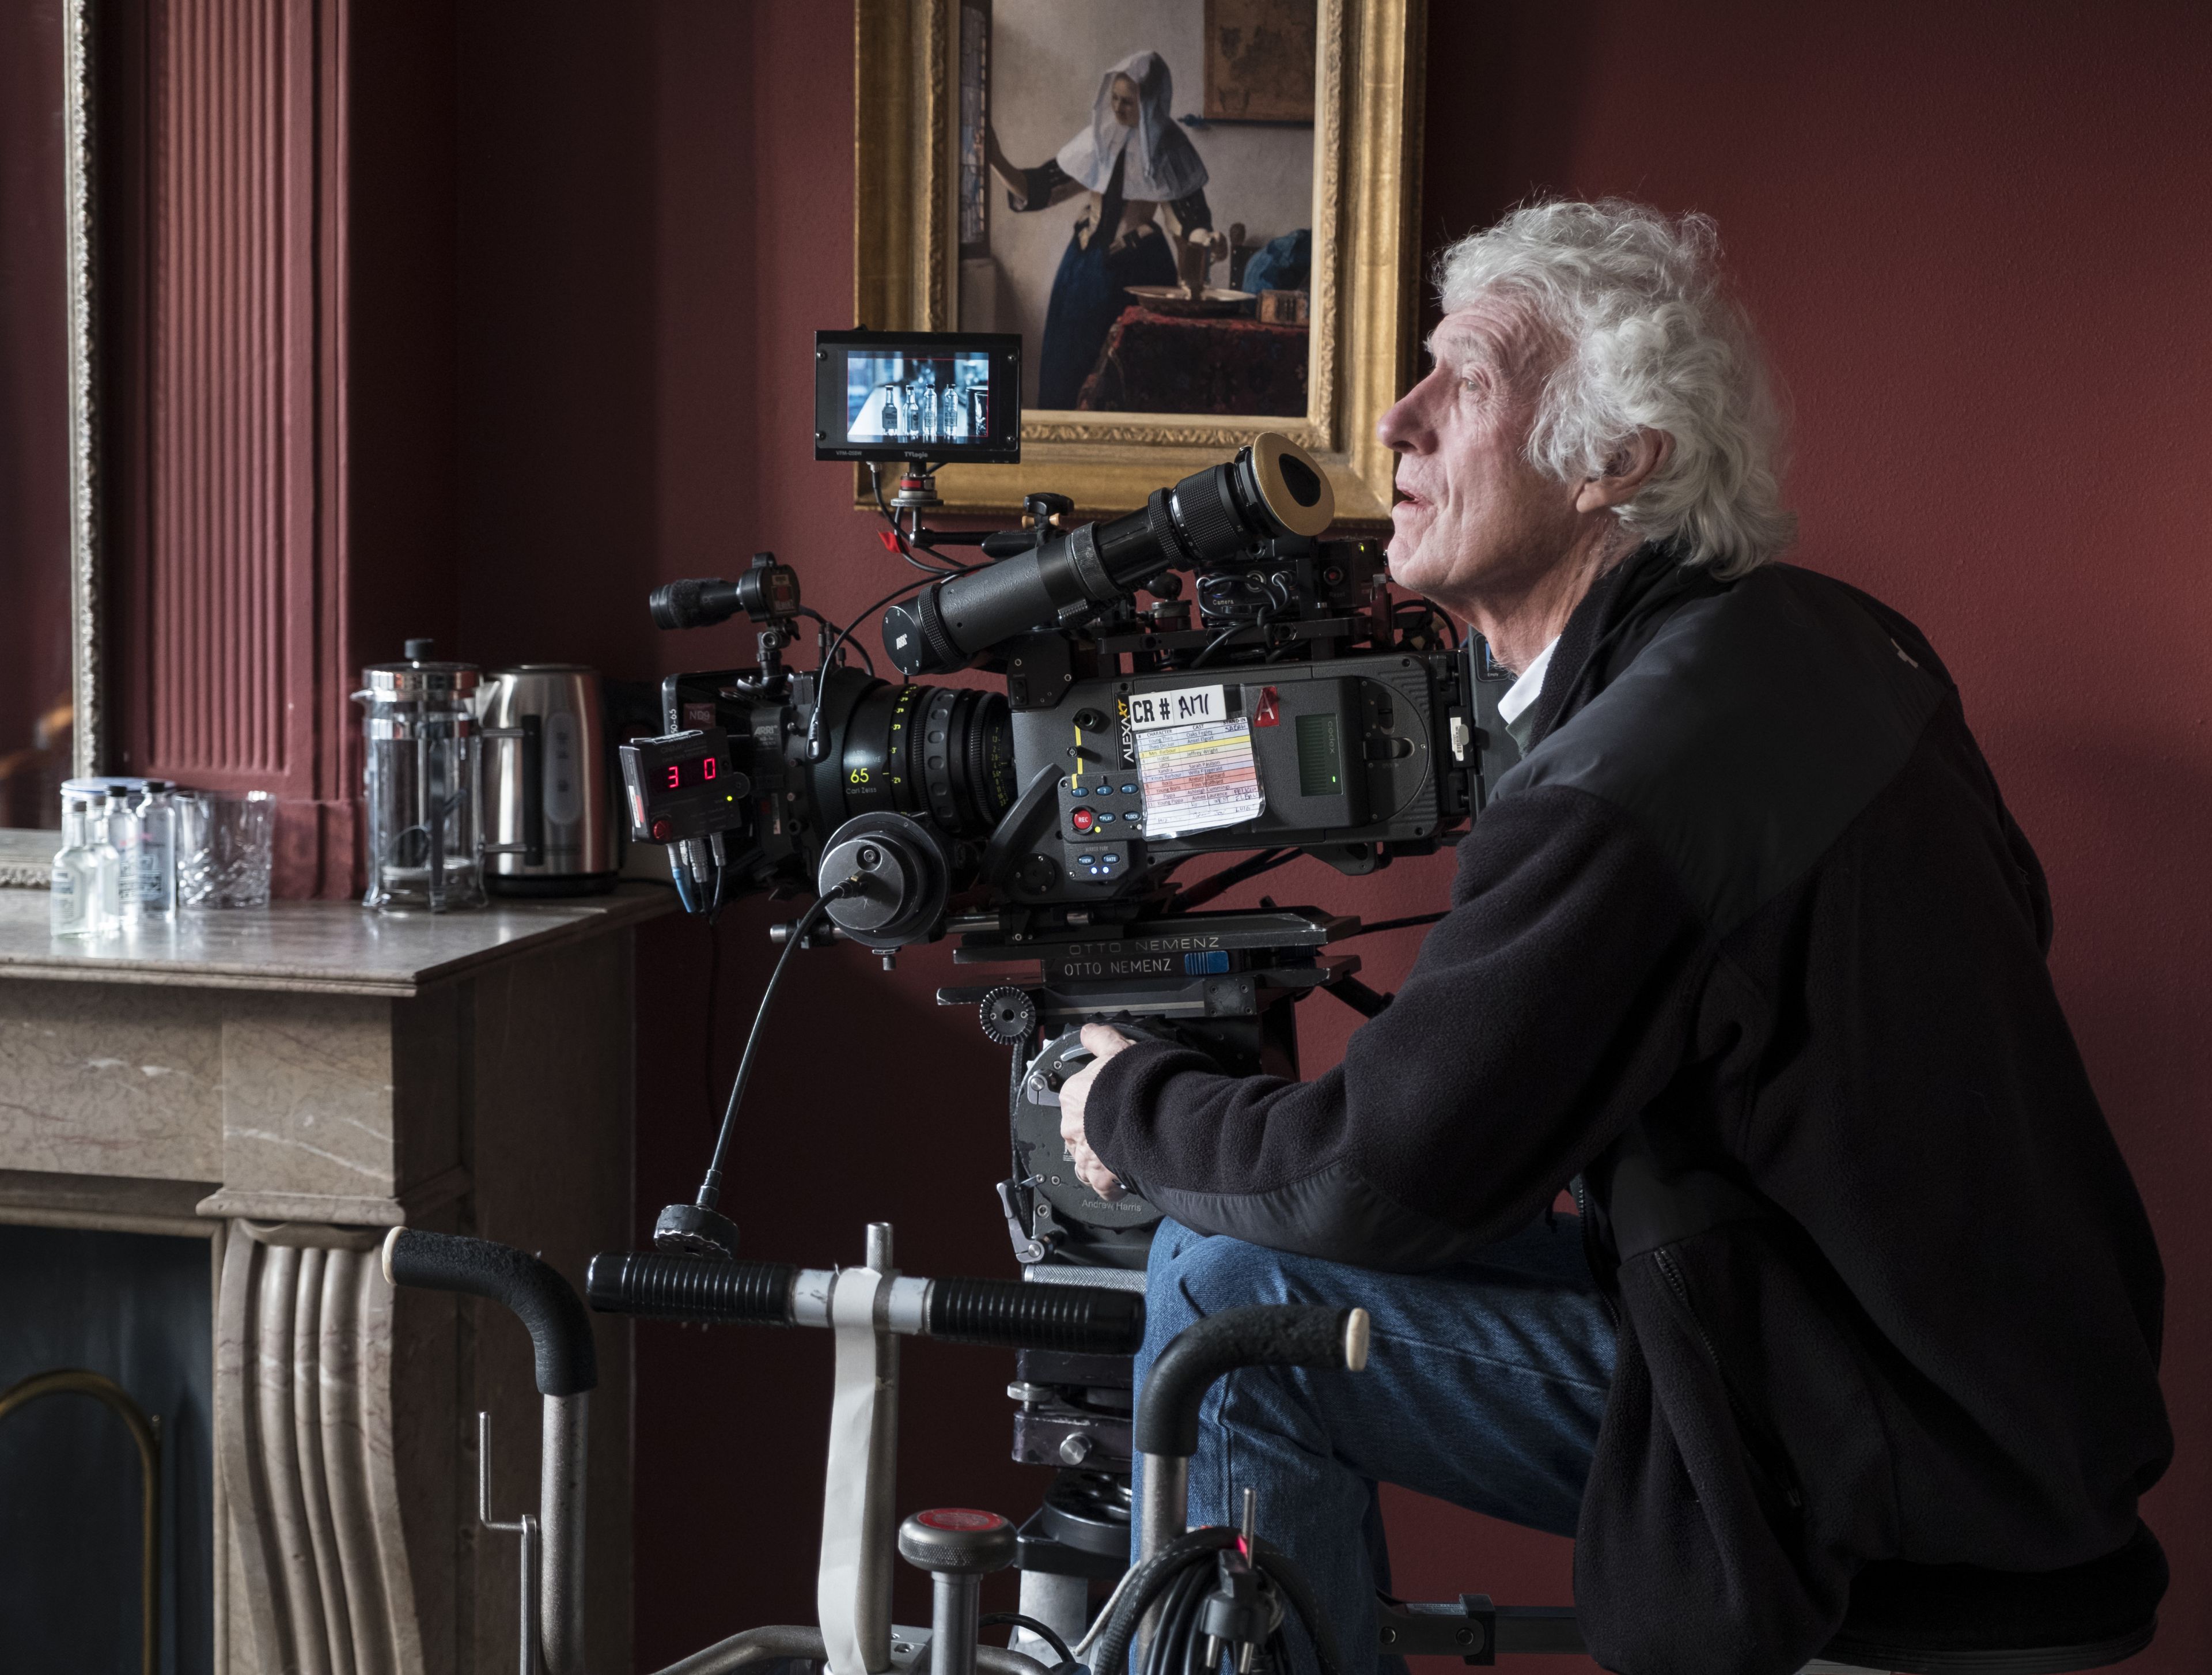 ART OF THE CUT with Kelley Dixon, ACE on editing "The Goldfinch" 50